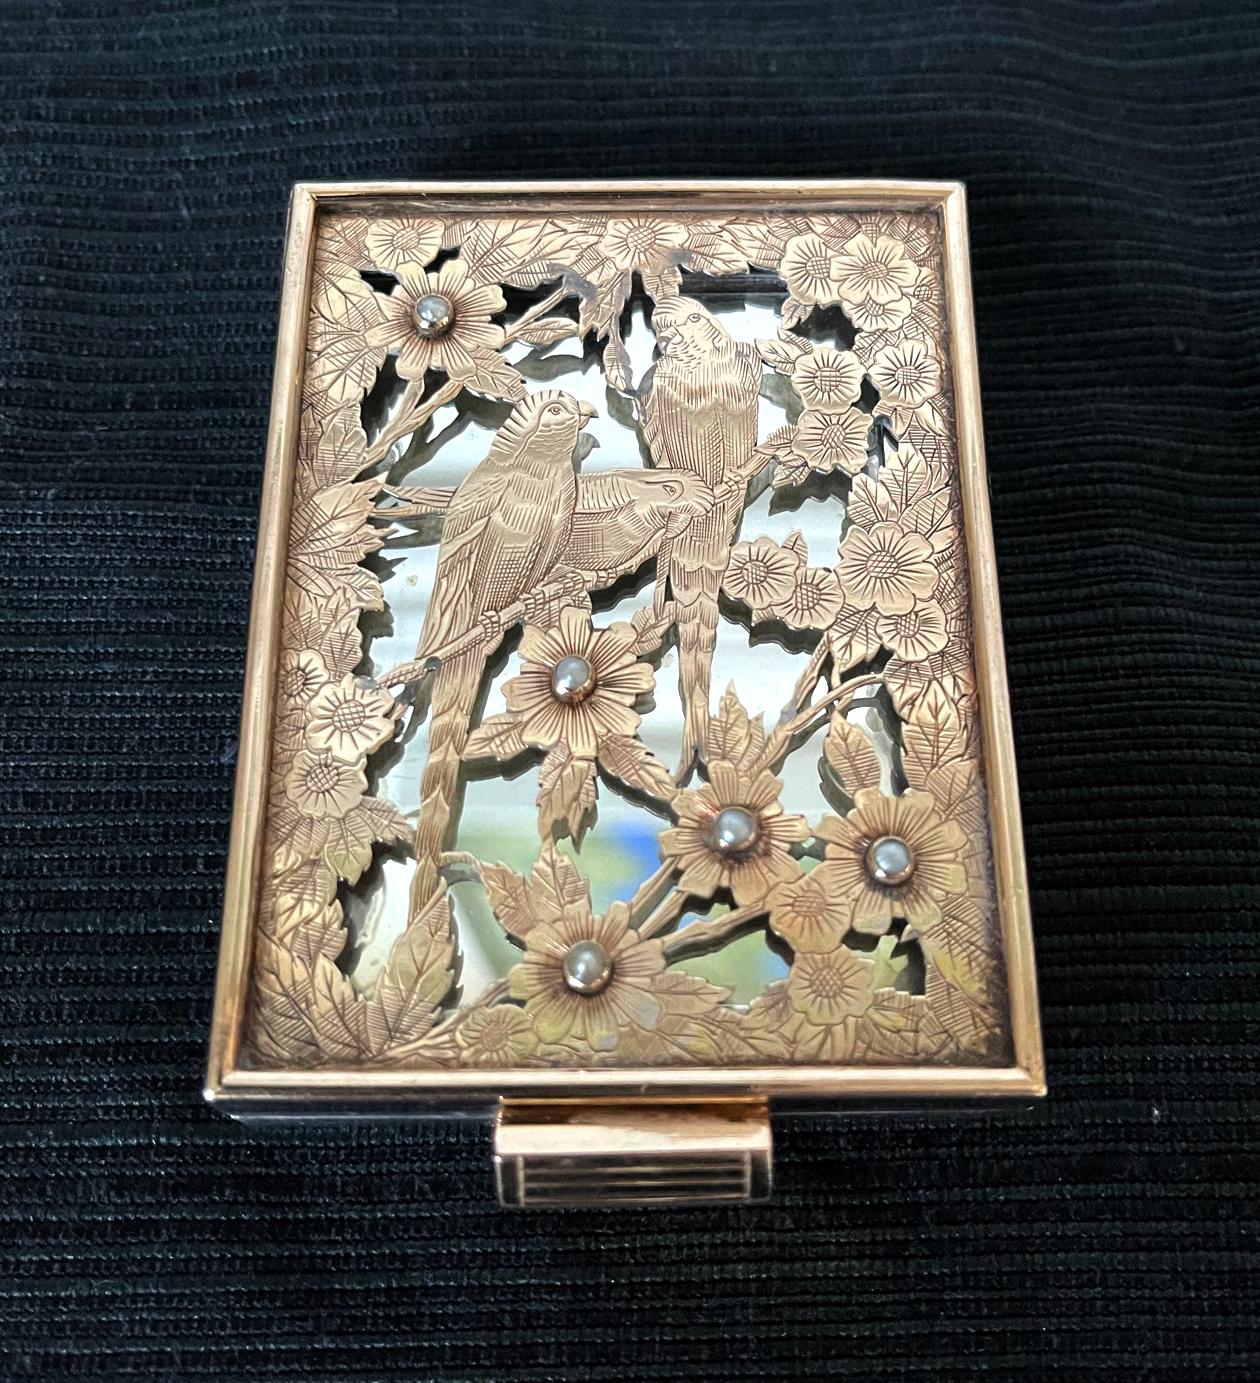 A stunning silver compact case with gilt by Boucheron Paris circa 1930s-1940s, of Art Deco period and style. The silver case features an iconic façade with a pierced and chased three parrots perching on flowering branches set with five mini pearls.